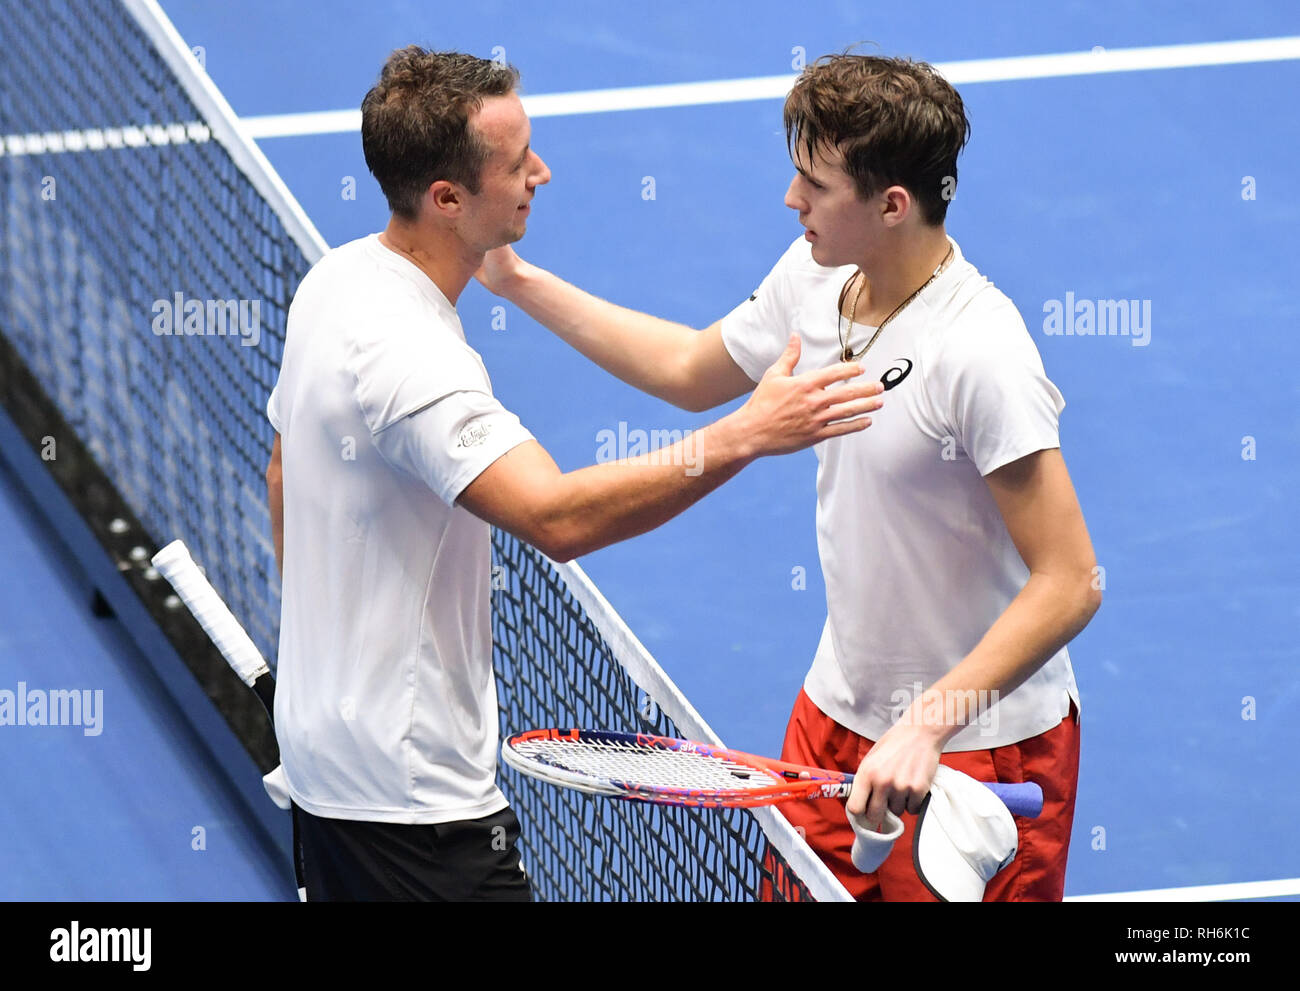 01 February 2019, Hessen, Frankfurt/Main: Tennis: Davis Cup, qualification  round Germany - Hungary in the Fraport Arena. Germany's Philipp  Kohlschreiber (l) and Hungary's Zsombor Piros shake hands after the game.  Photo: Arne